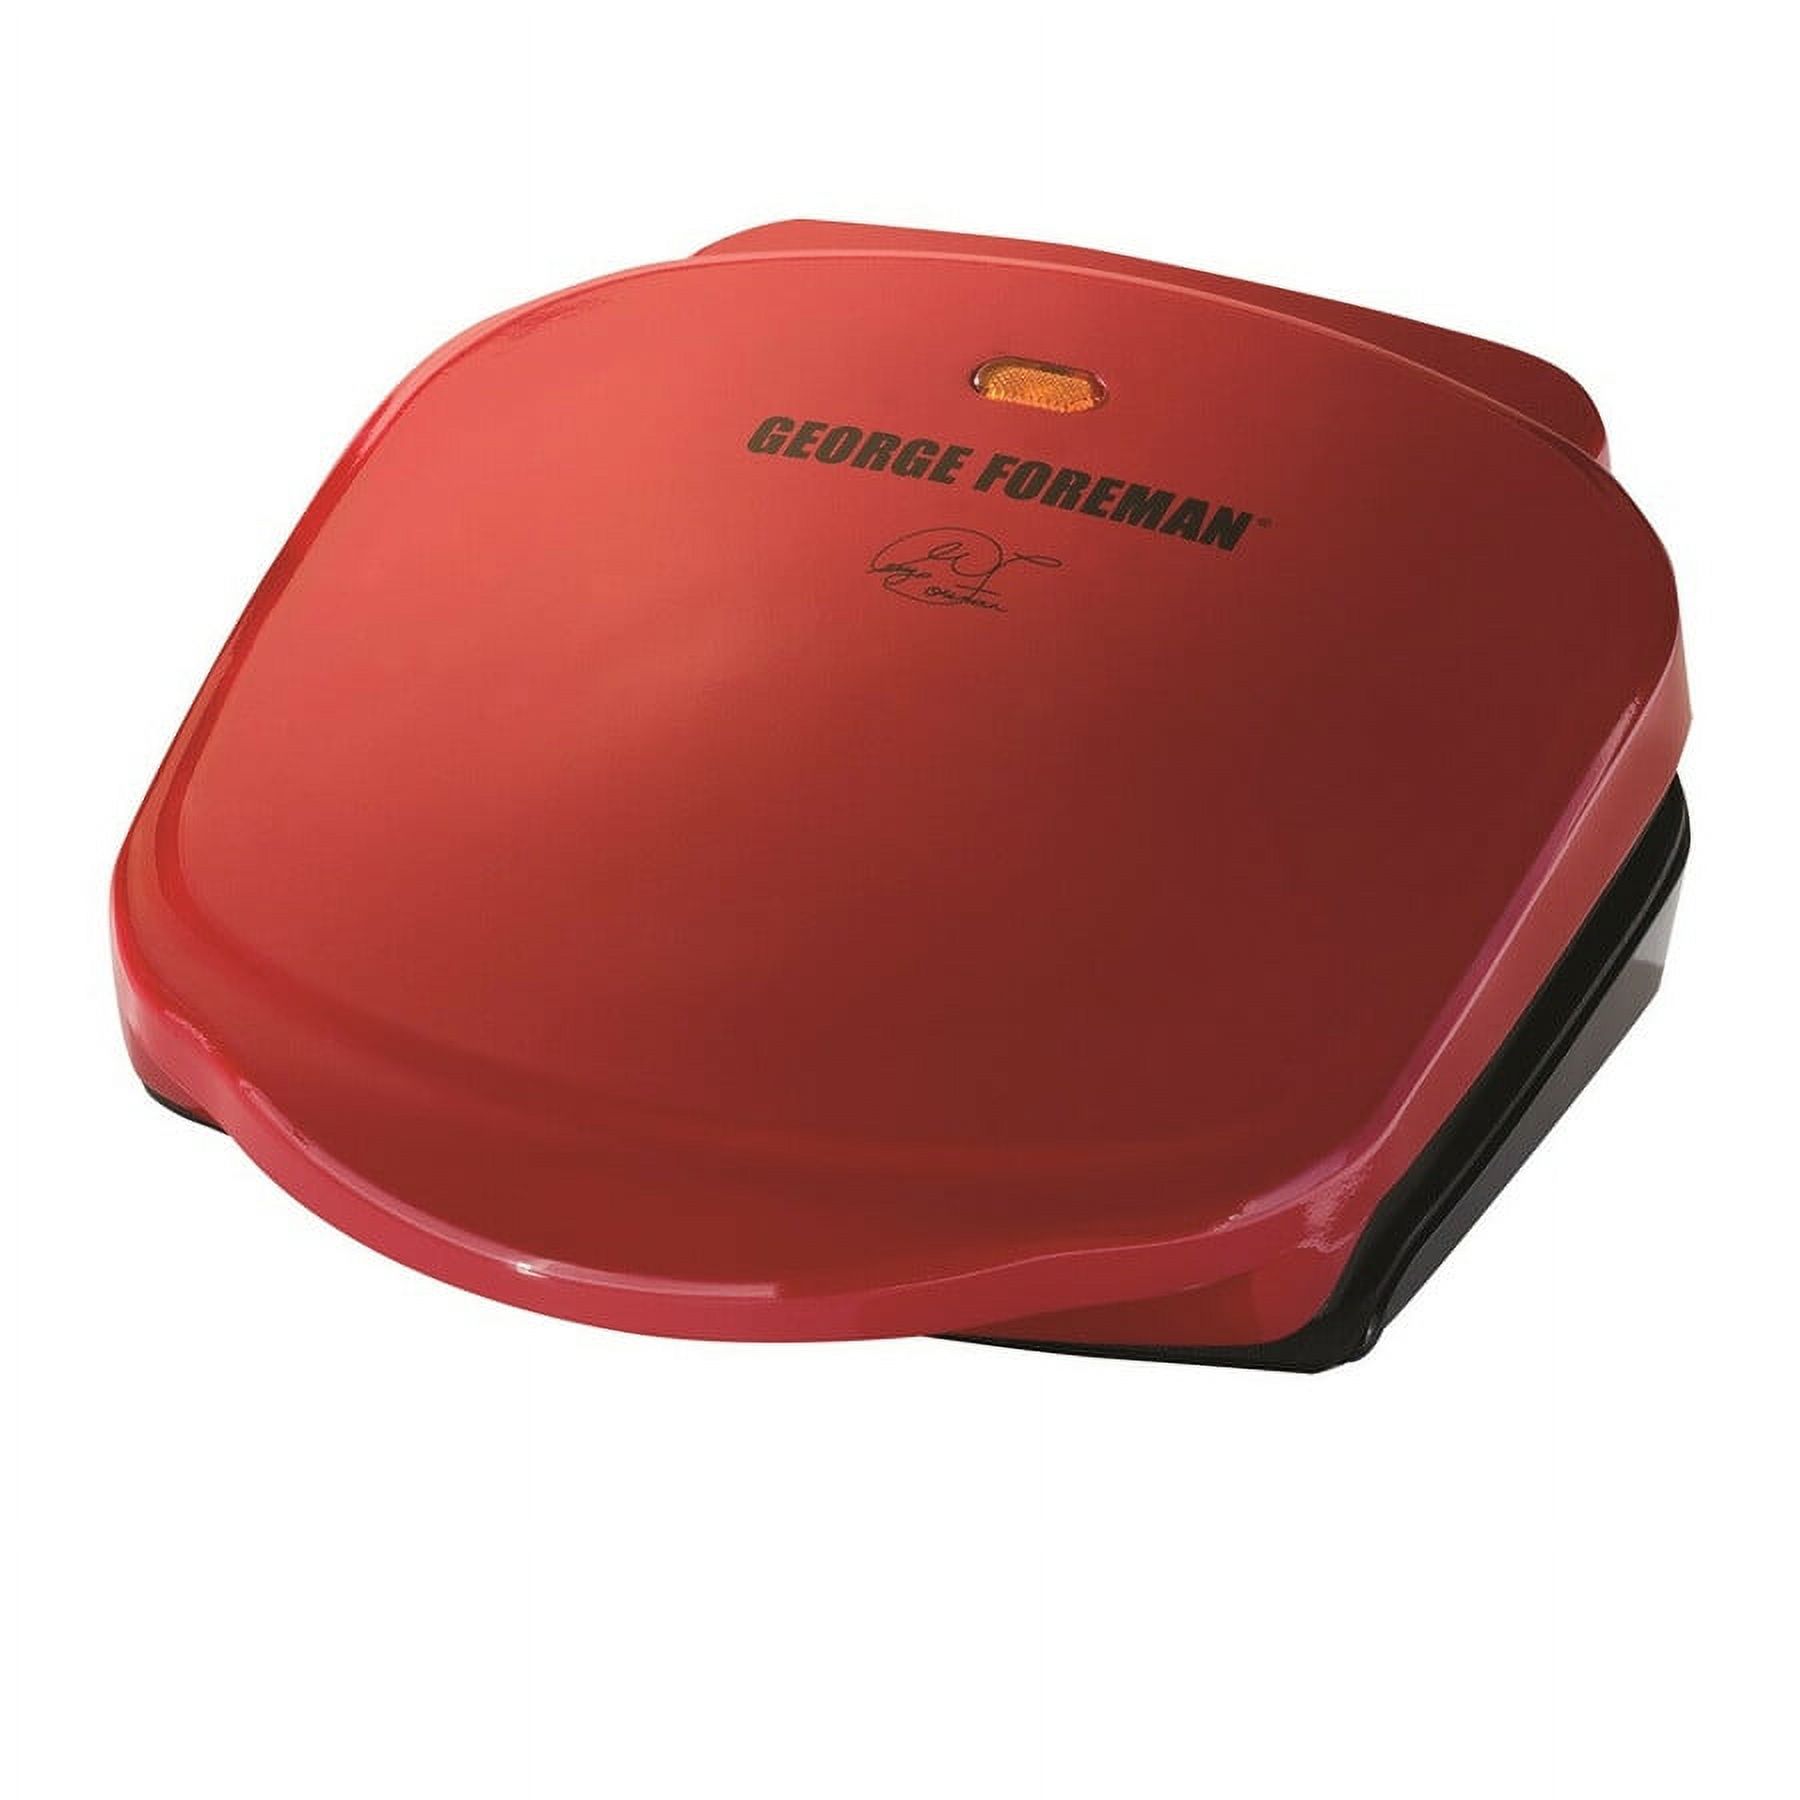 George Foreman 2-Serving Classic Plate Electric Indoor Grill and Panini Press, Red, GR10RM - image 3 of 11